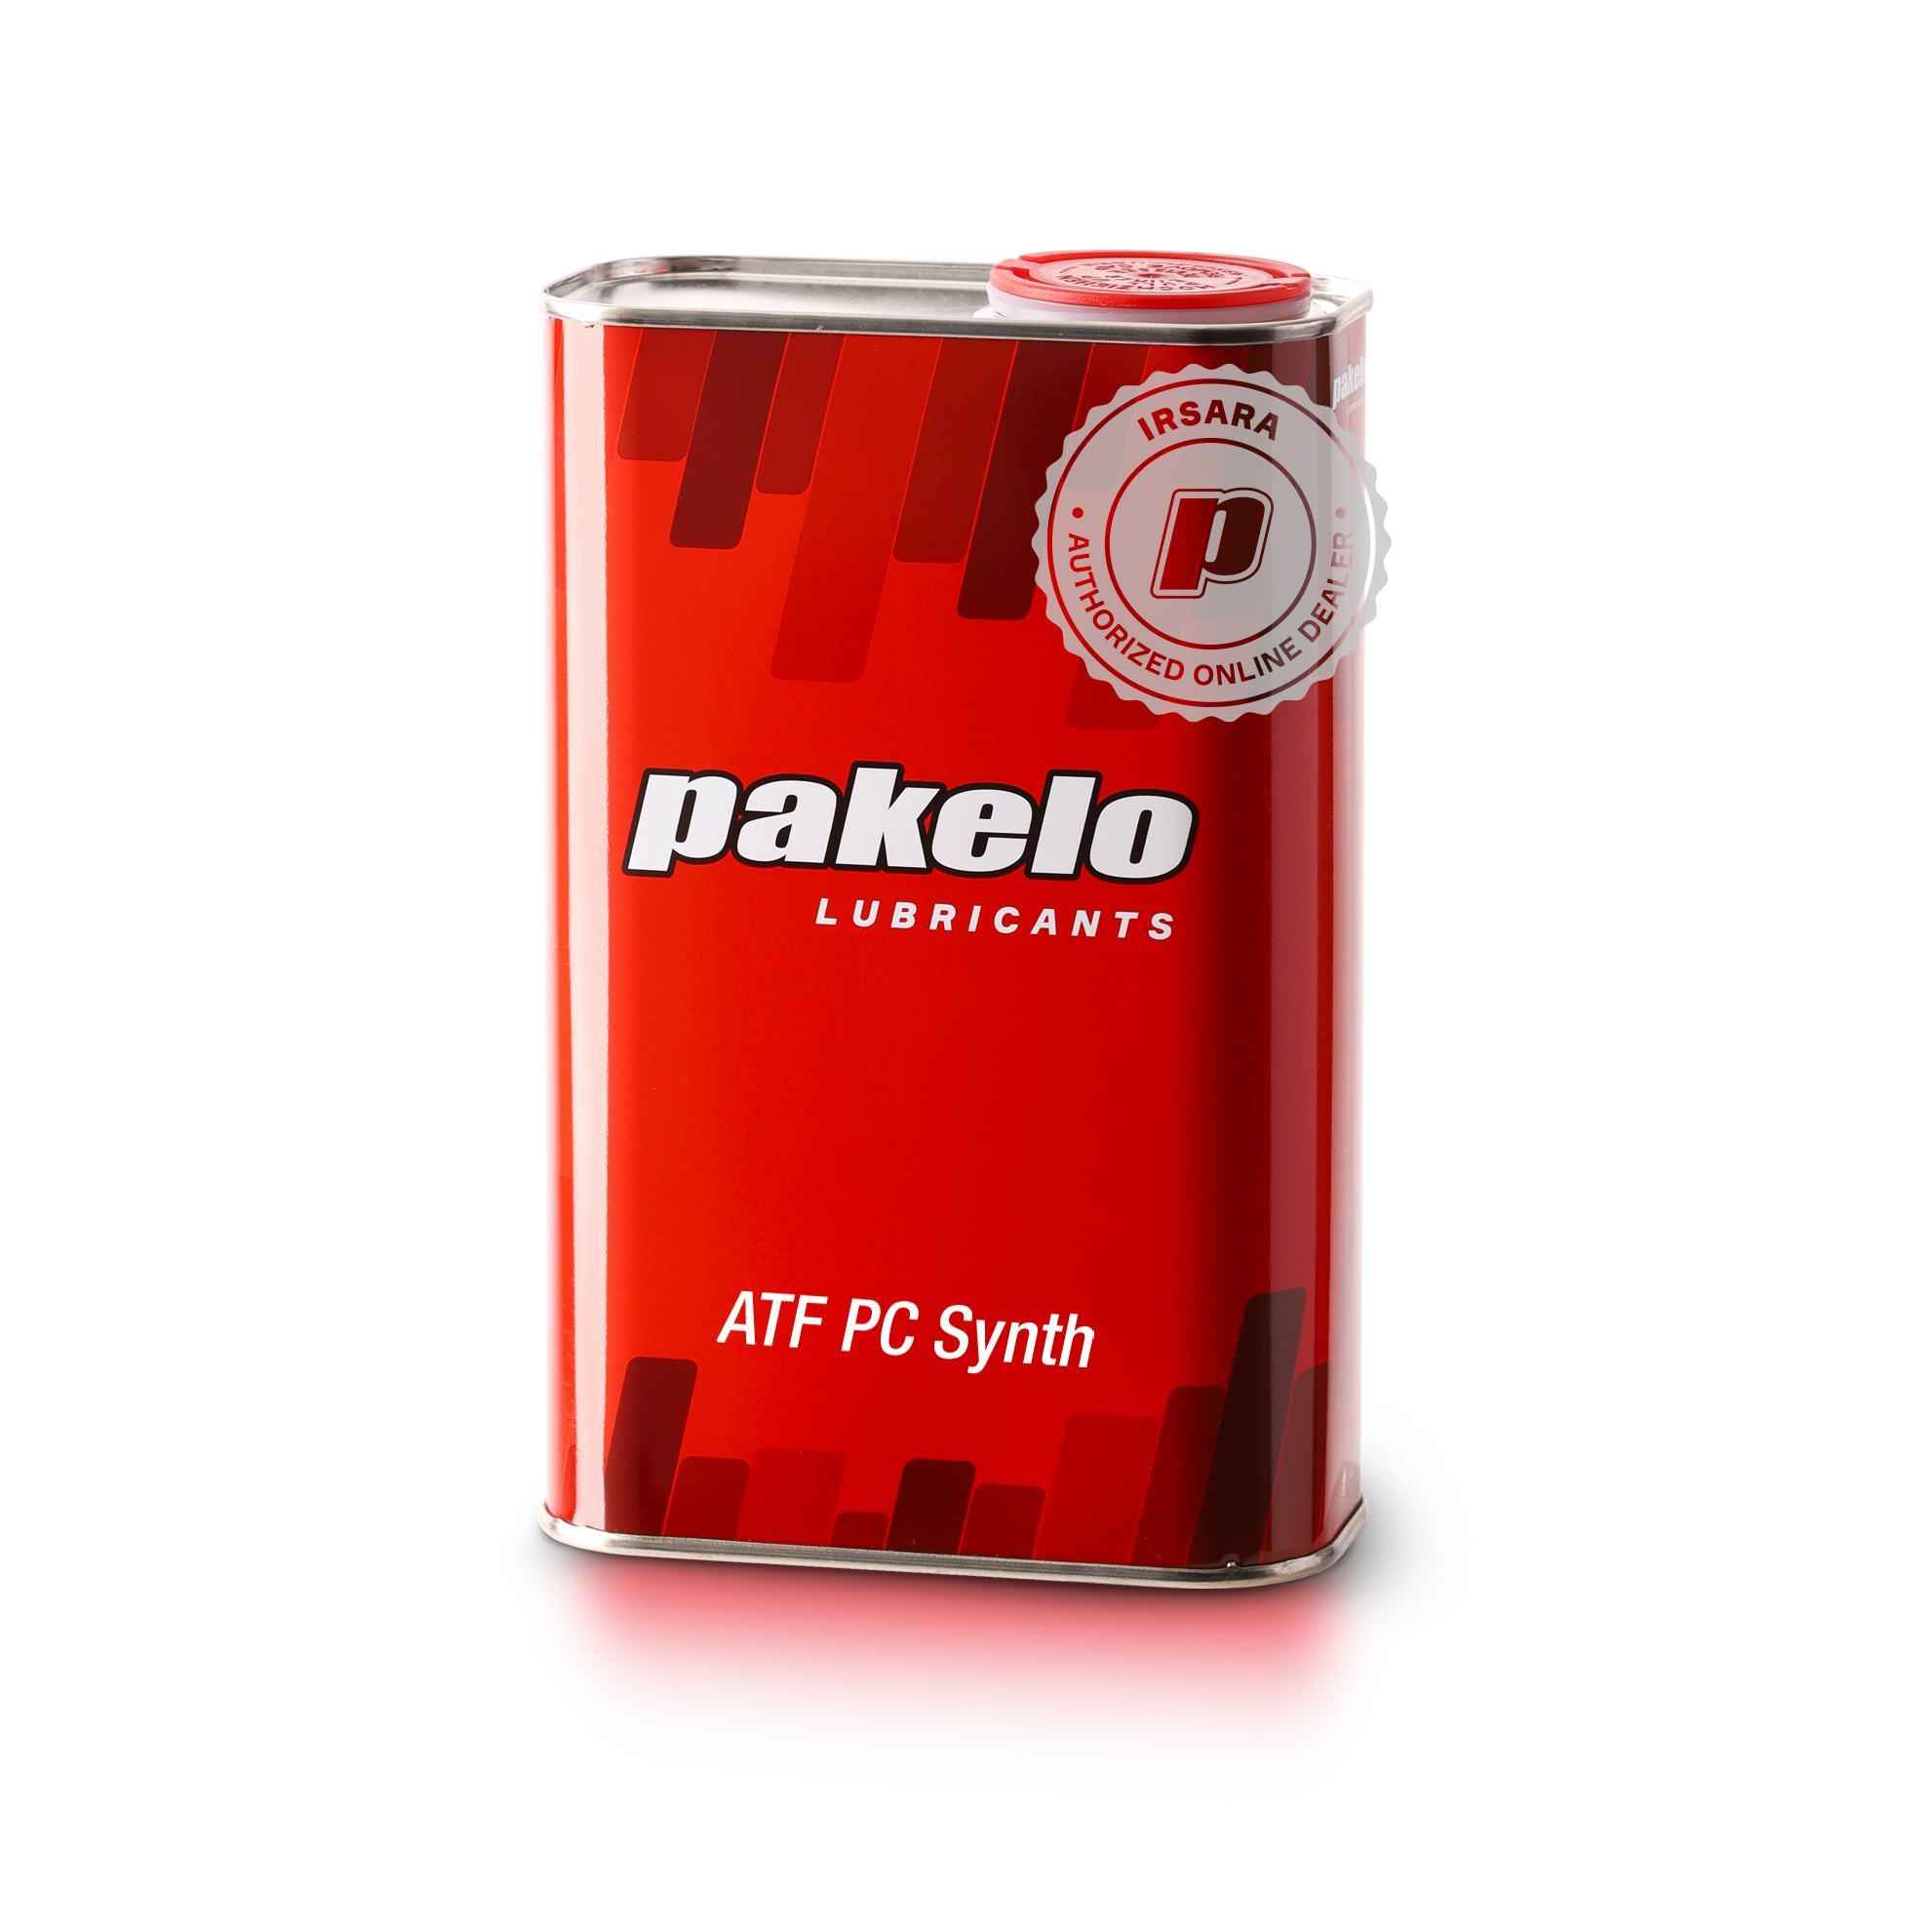 Pakelo Atf Pc Synth (1 Lt)